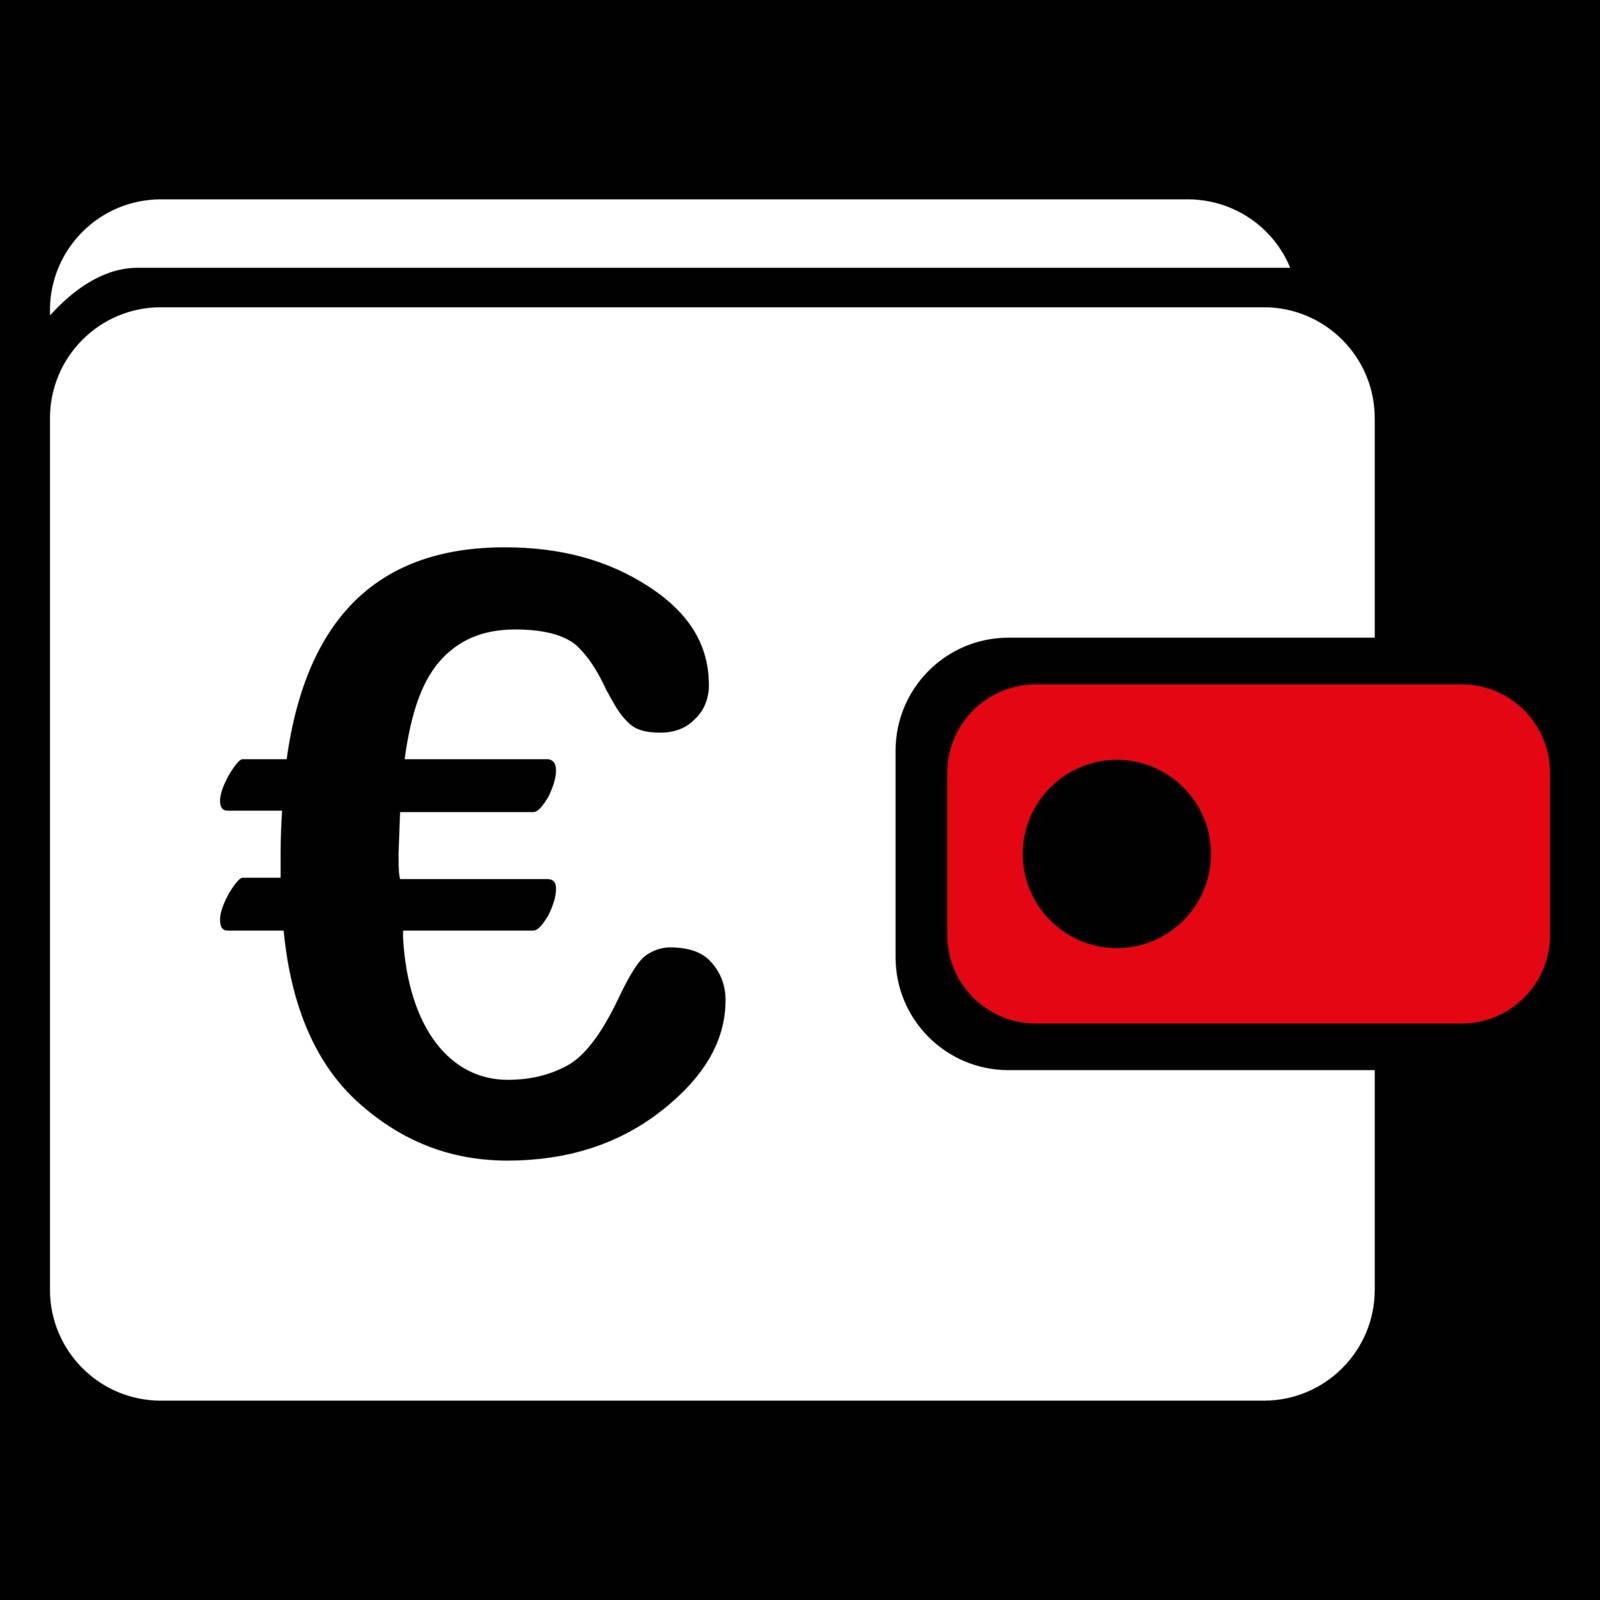 Purse from BiColor Euro Banking Icon Set. Vector style is flat bicolor, red and white symbol, rounded angles, black background.